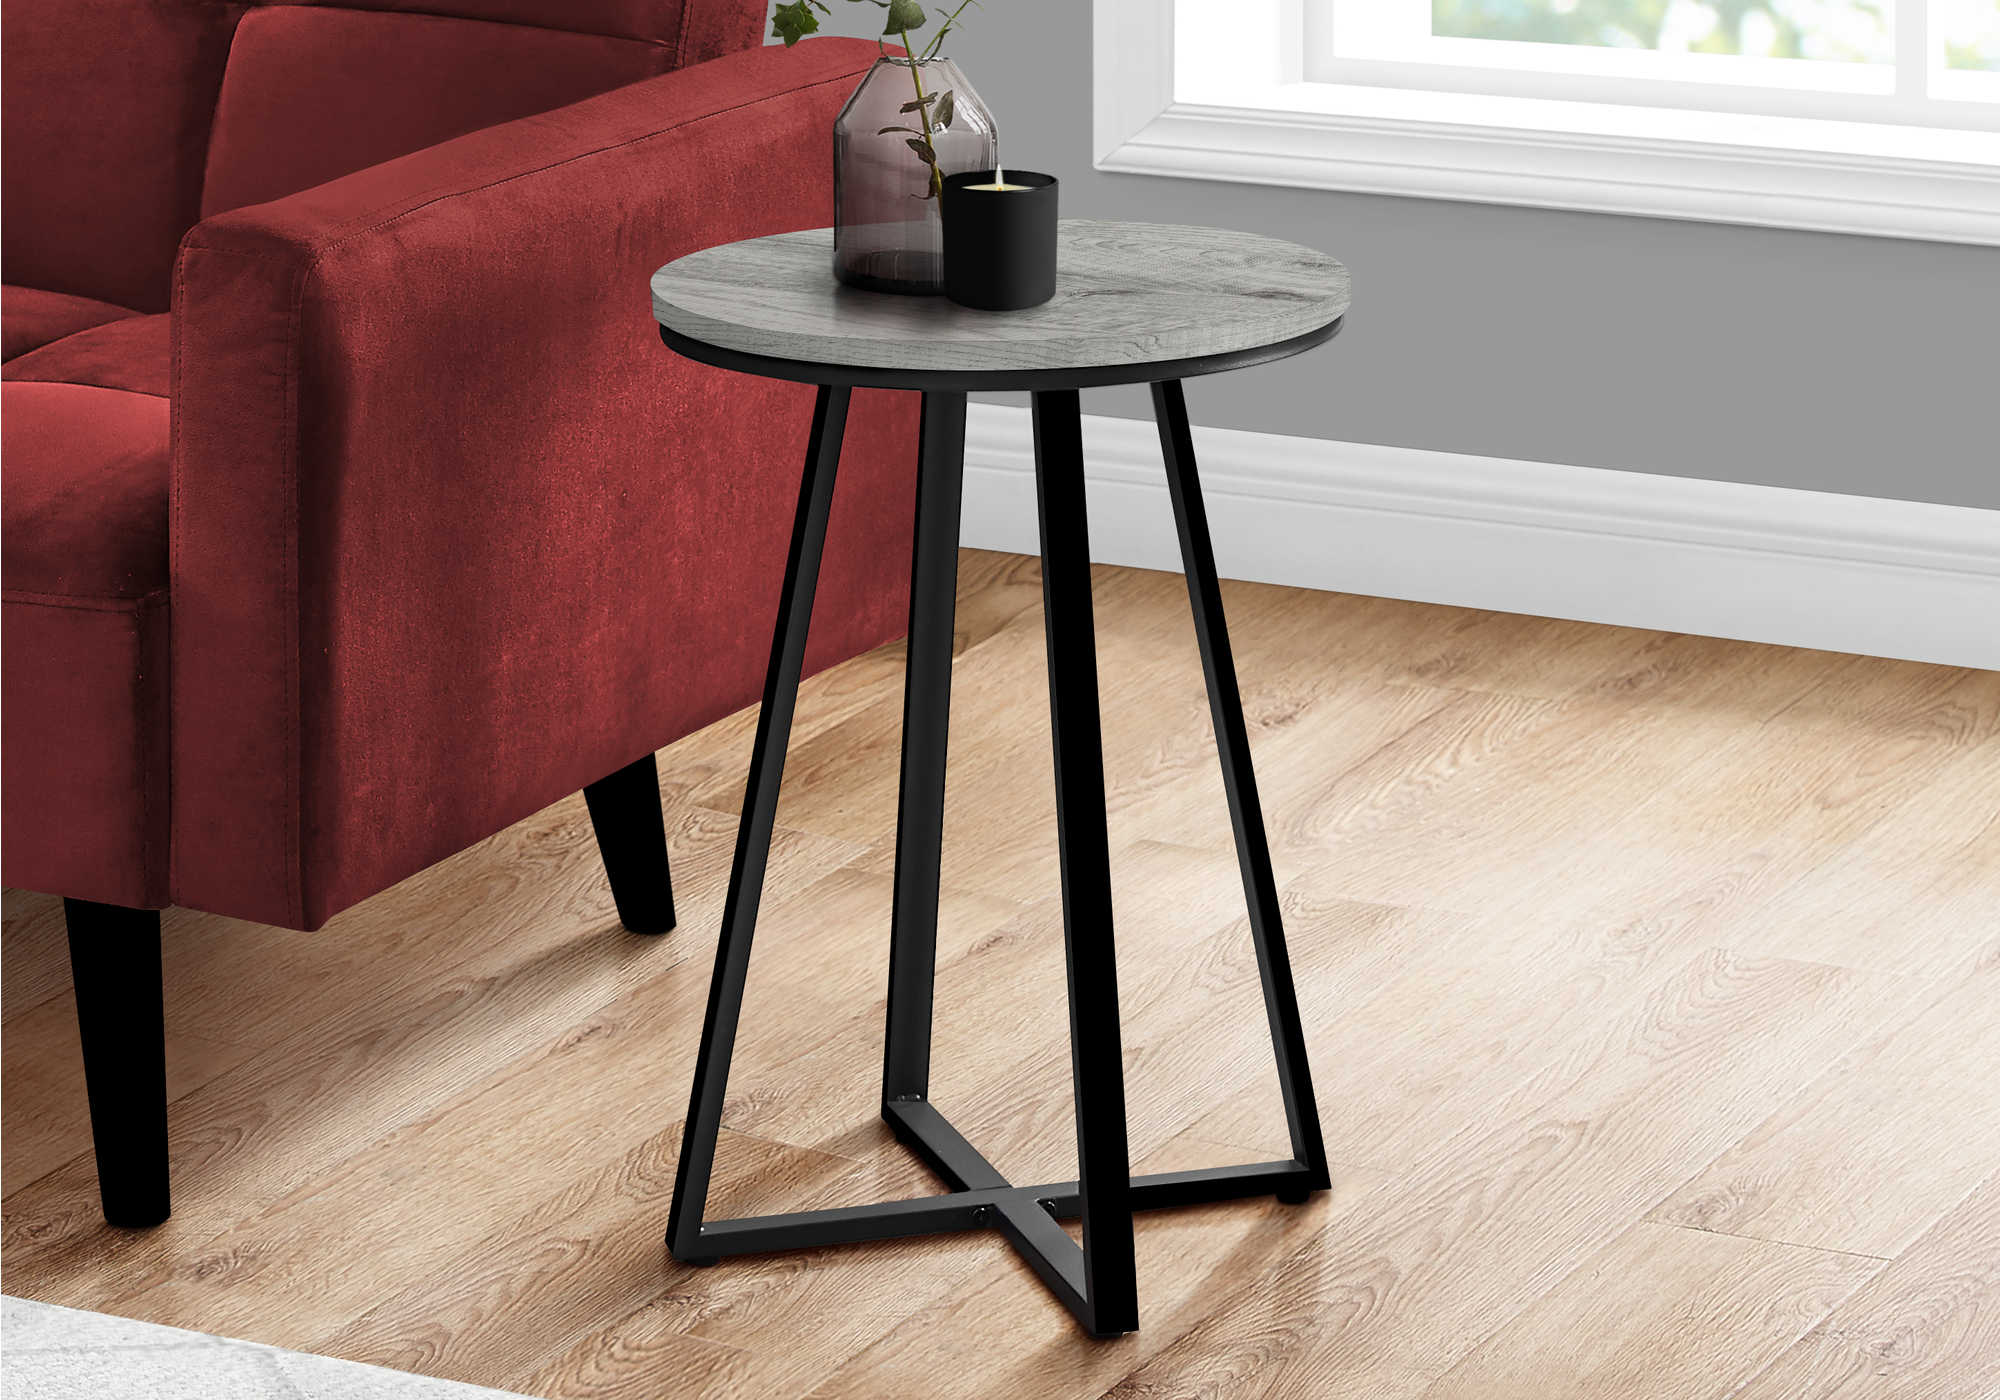 I 2176 - ACCENT TABLE - 22"H / GREY / BLACK METAL BY MONARCH SPECIALTIES INC